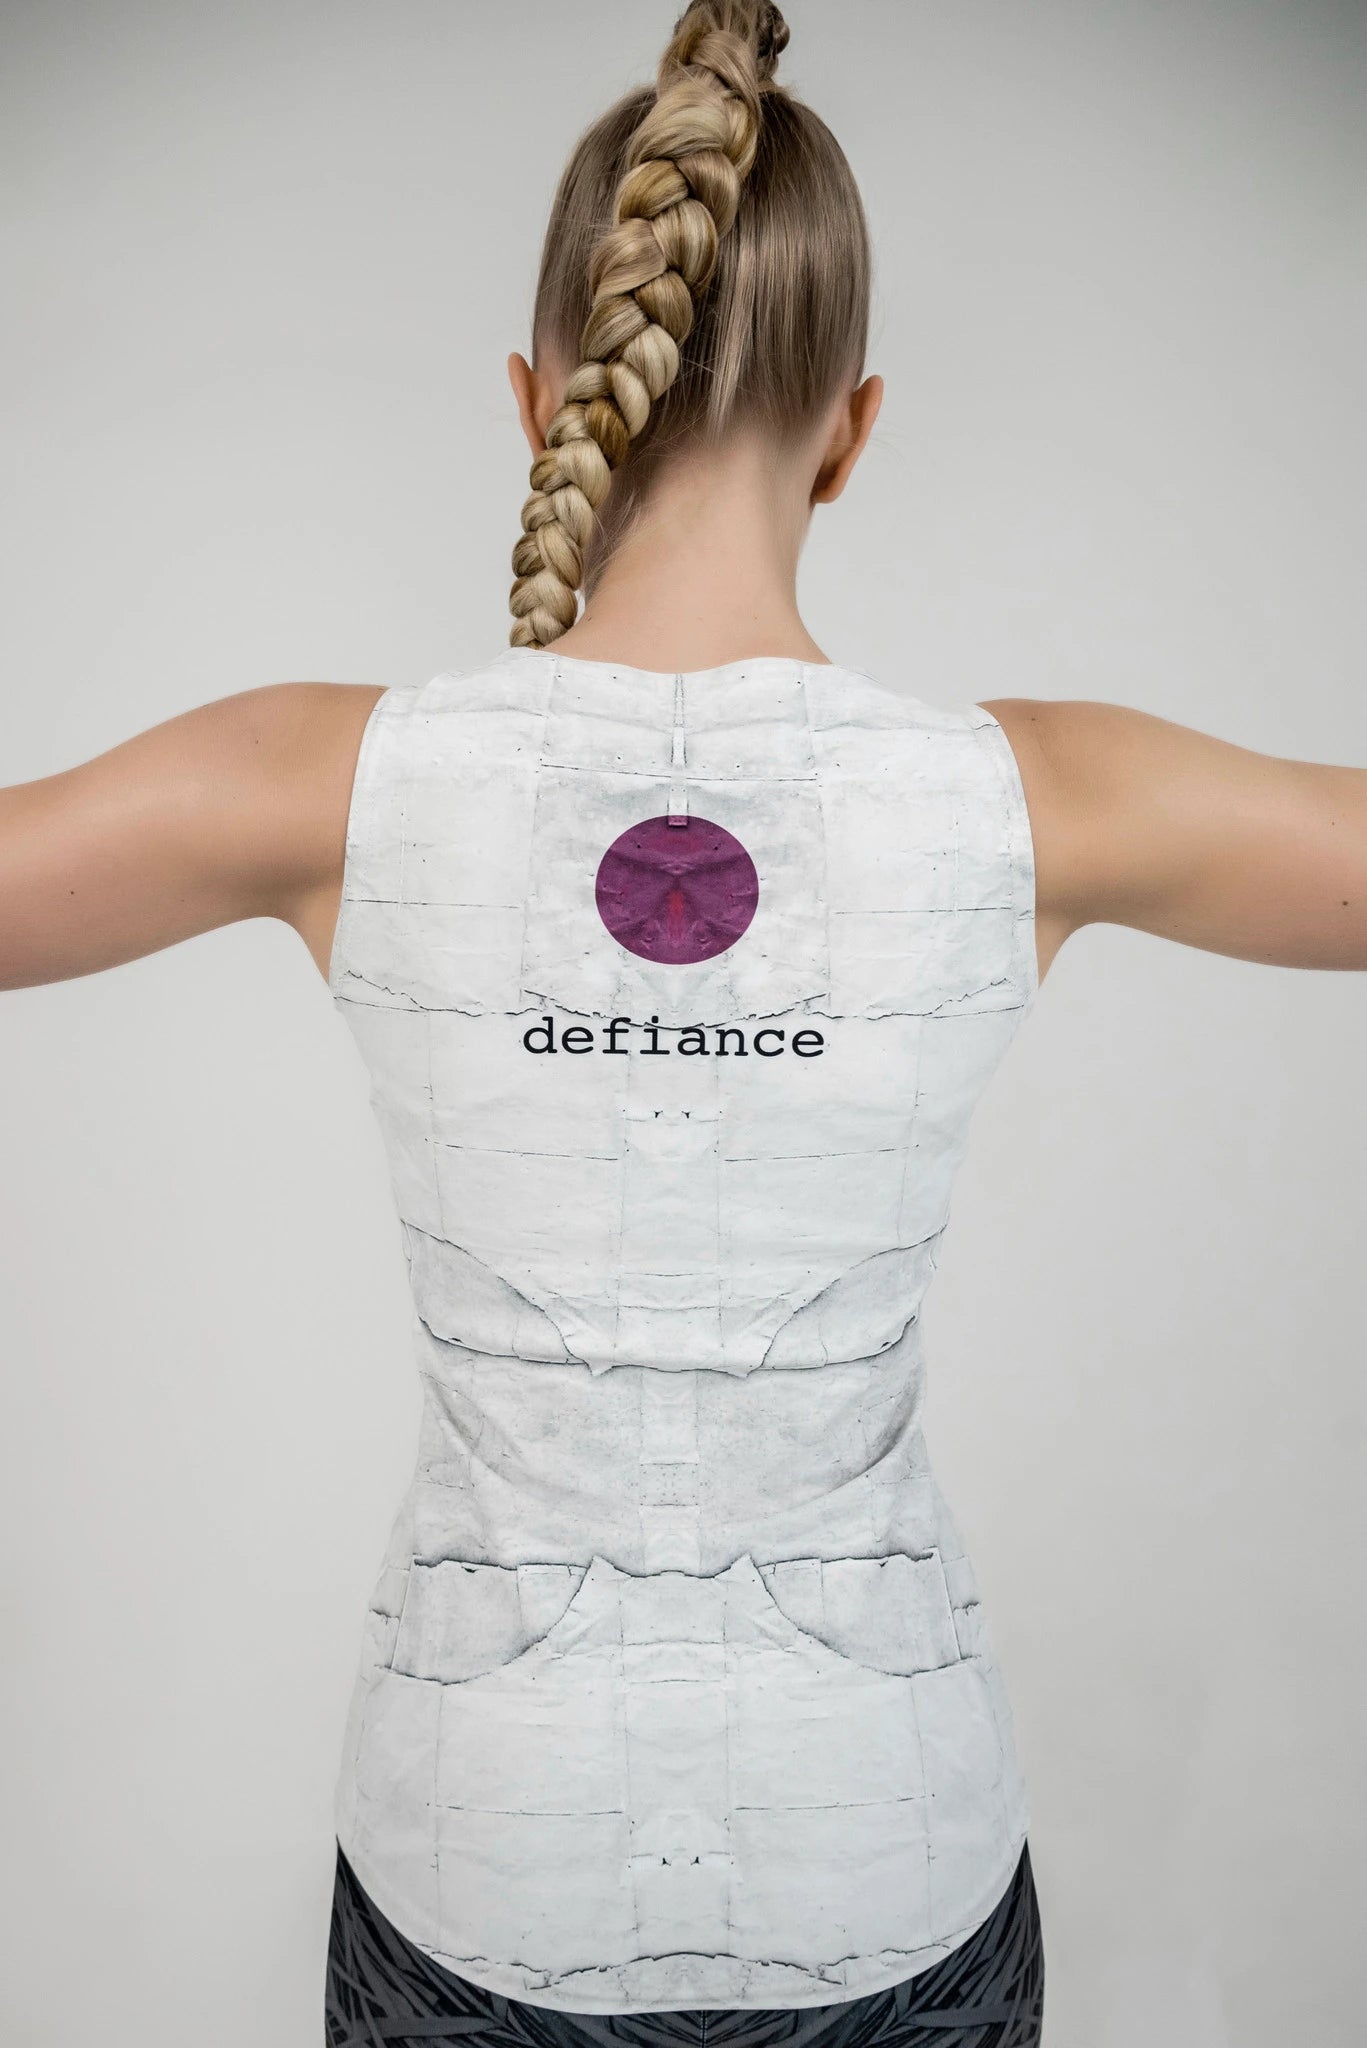 Model turned around wearing a white tank top featuring the Defiance logo.